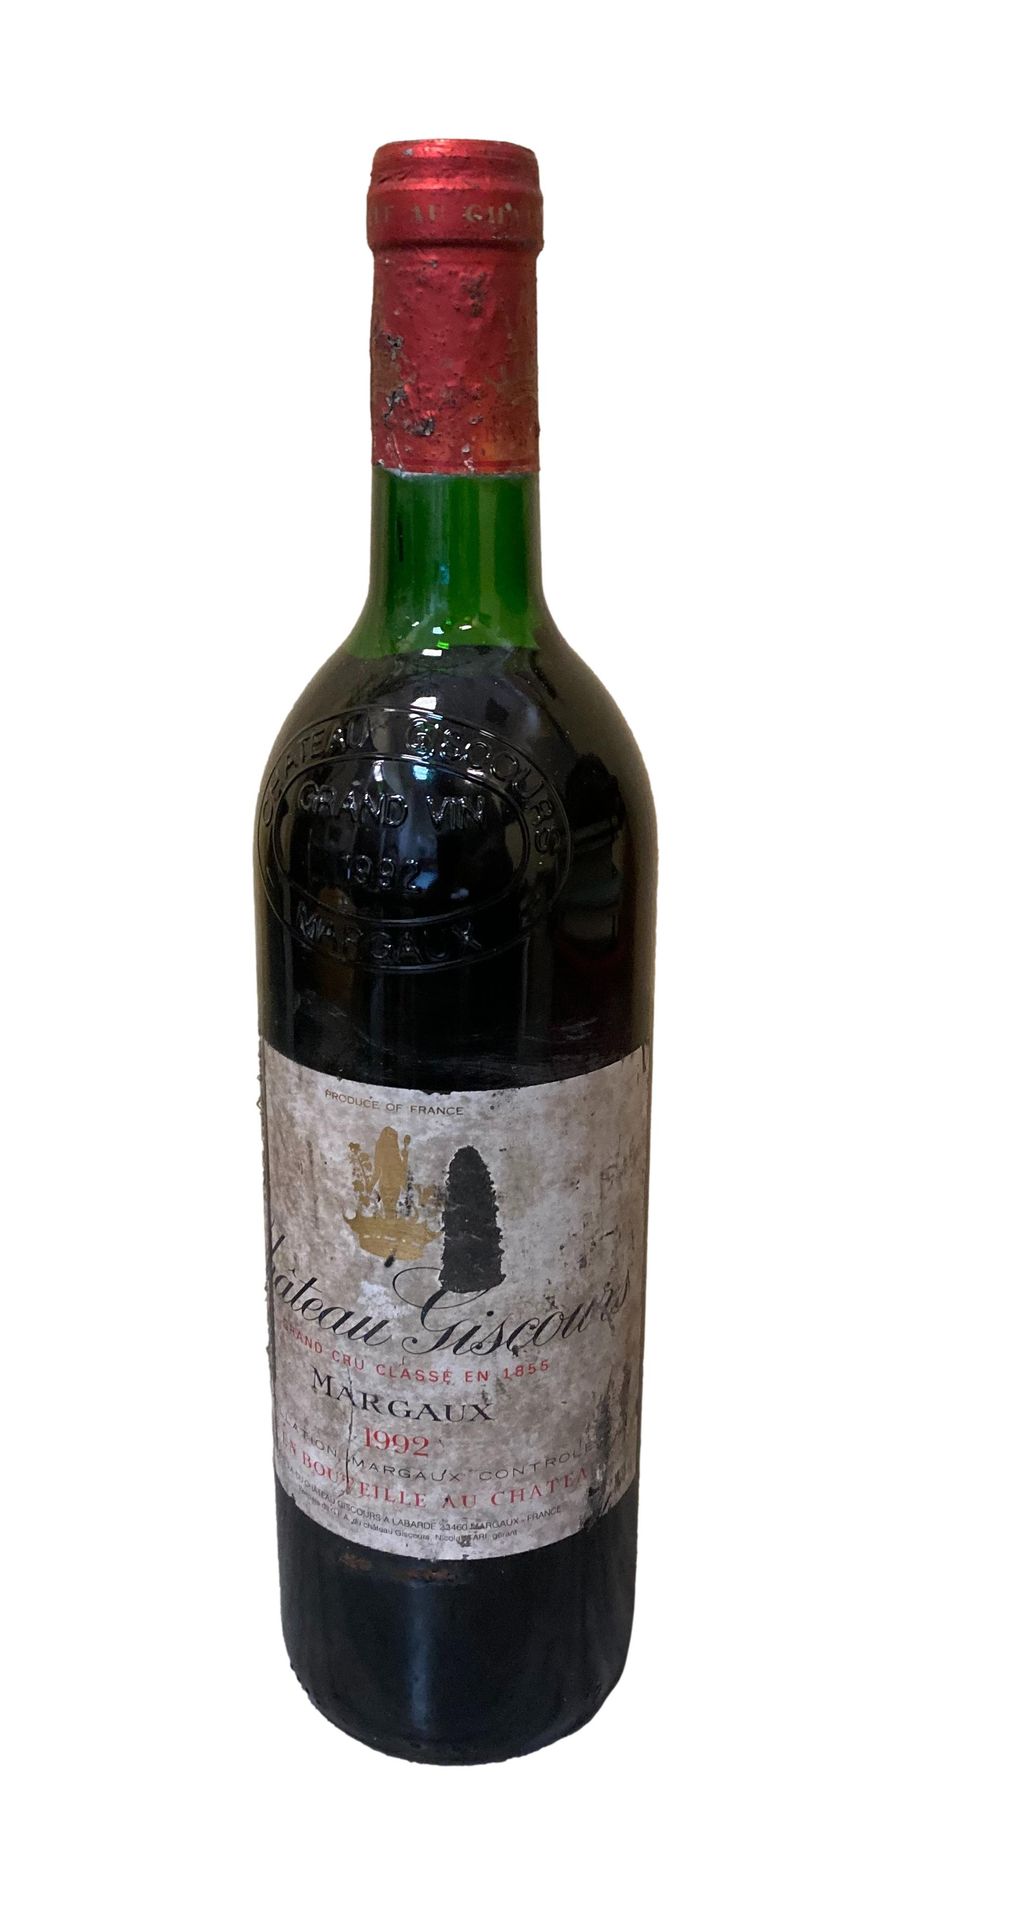 Null CHÂTEAU GISCOURS Margaux 1992
1 Flasche